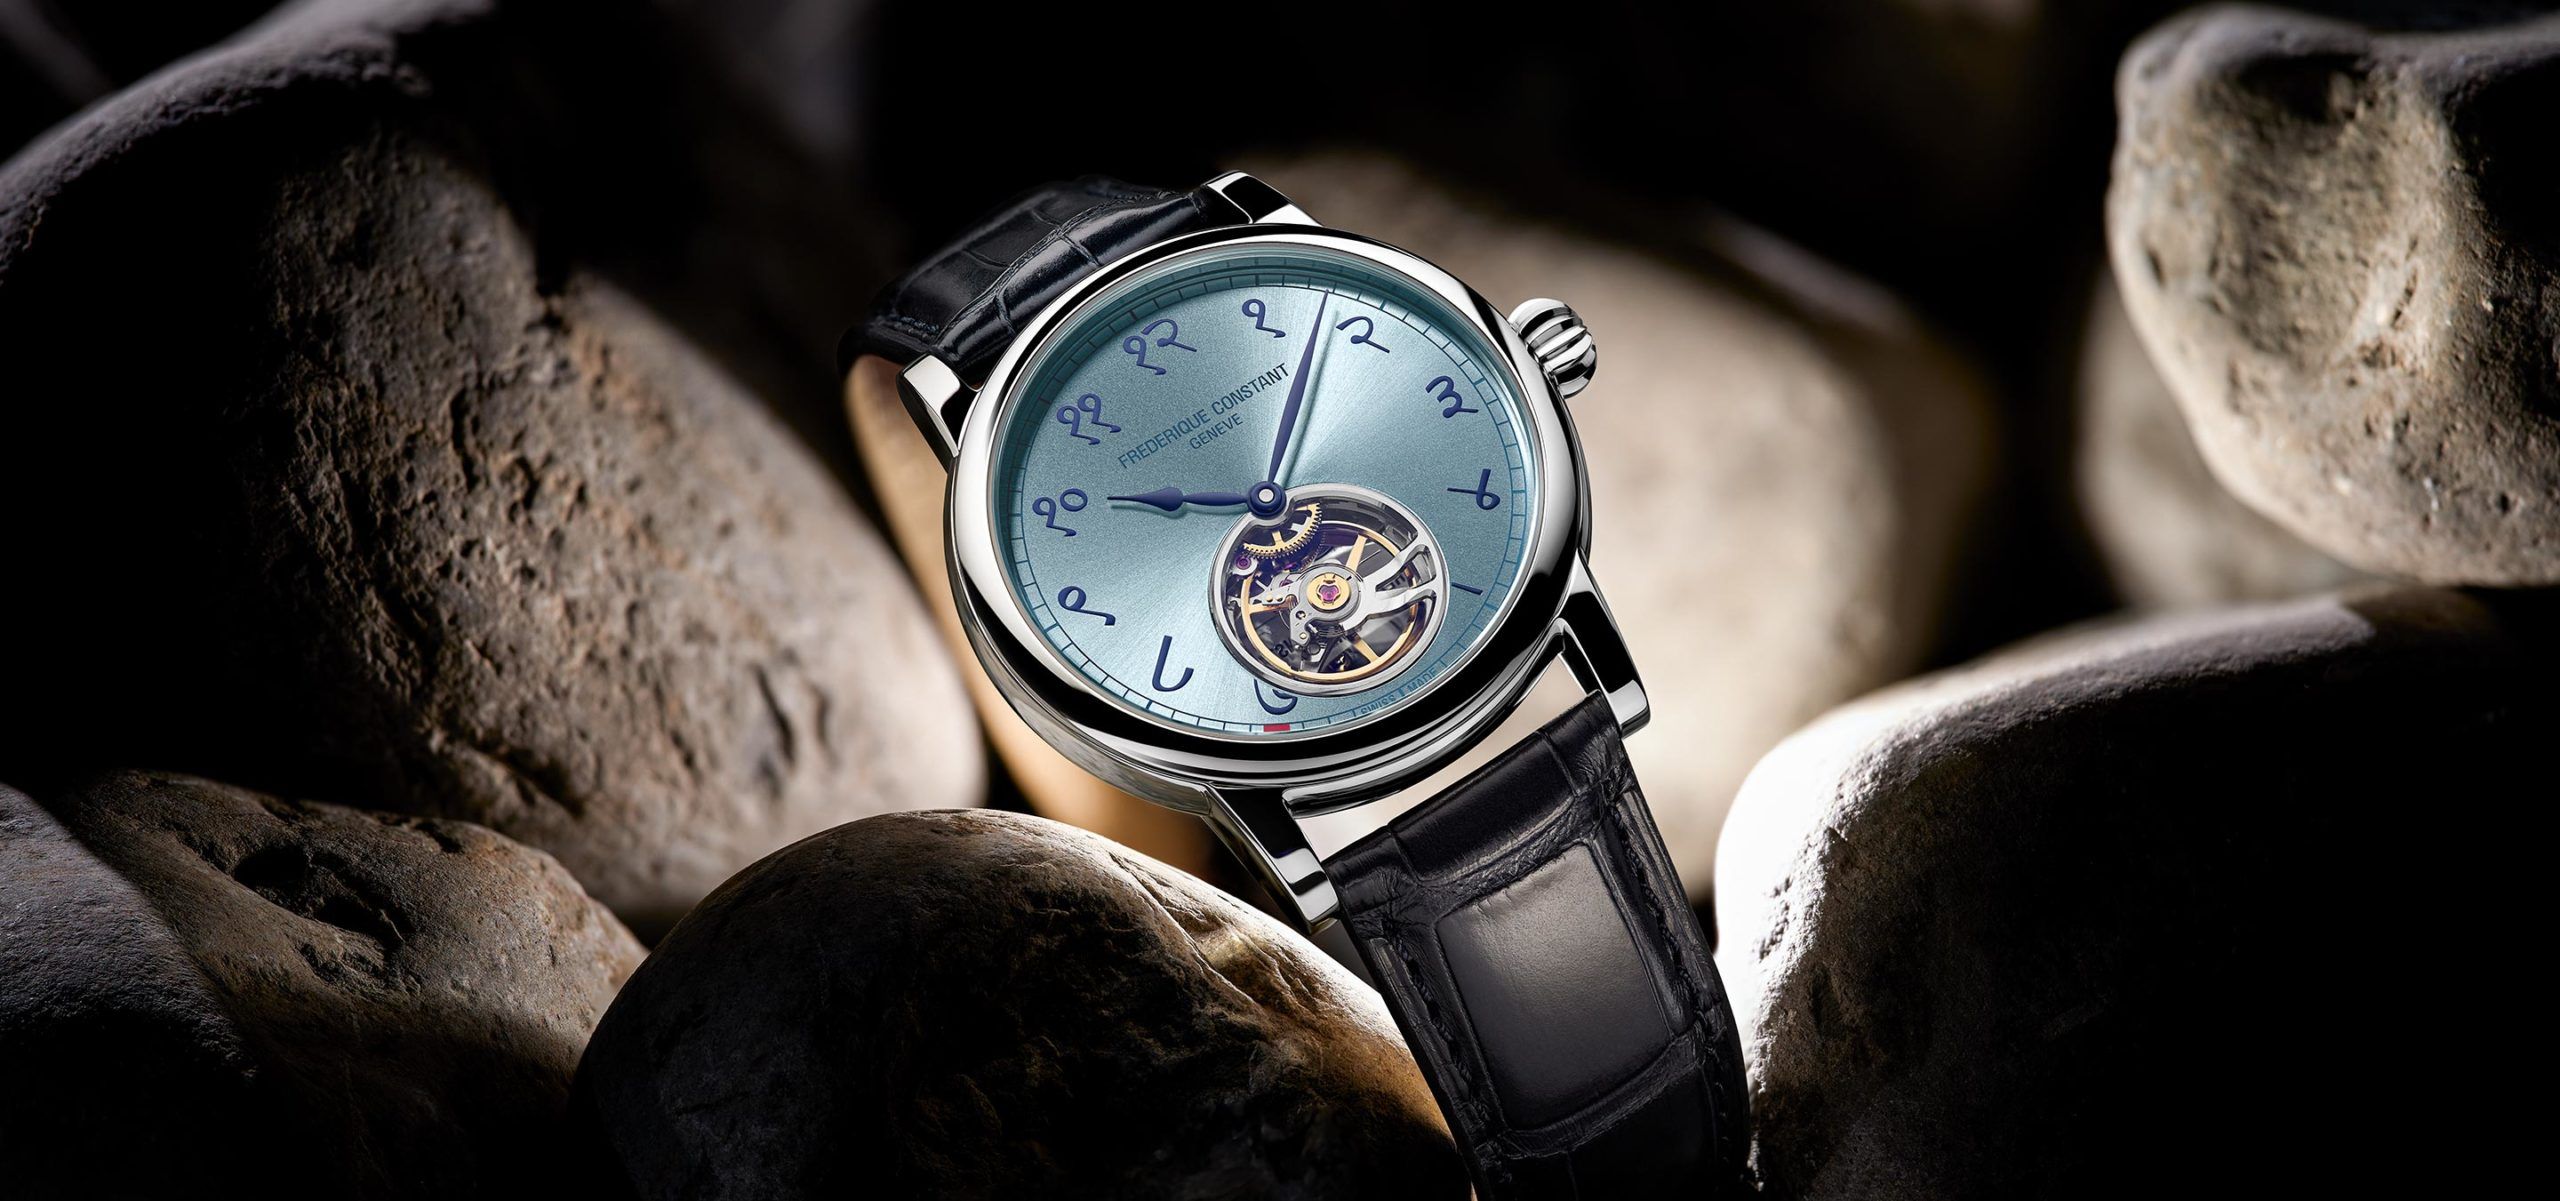 Presenting The Frederique Constant Manufacture Classic Heart Beat India Limited Edition Timepiece